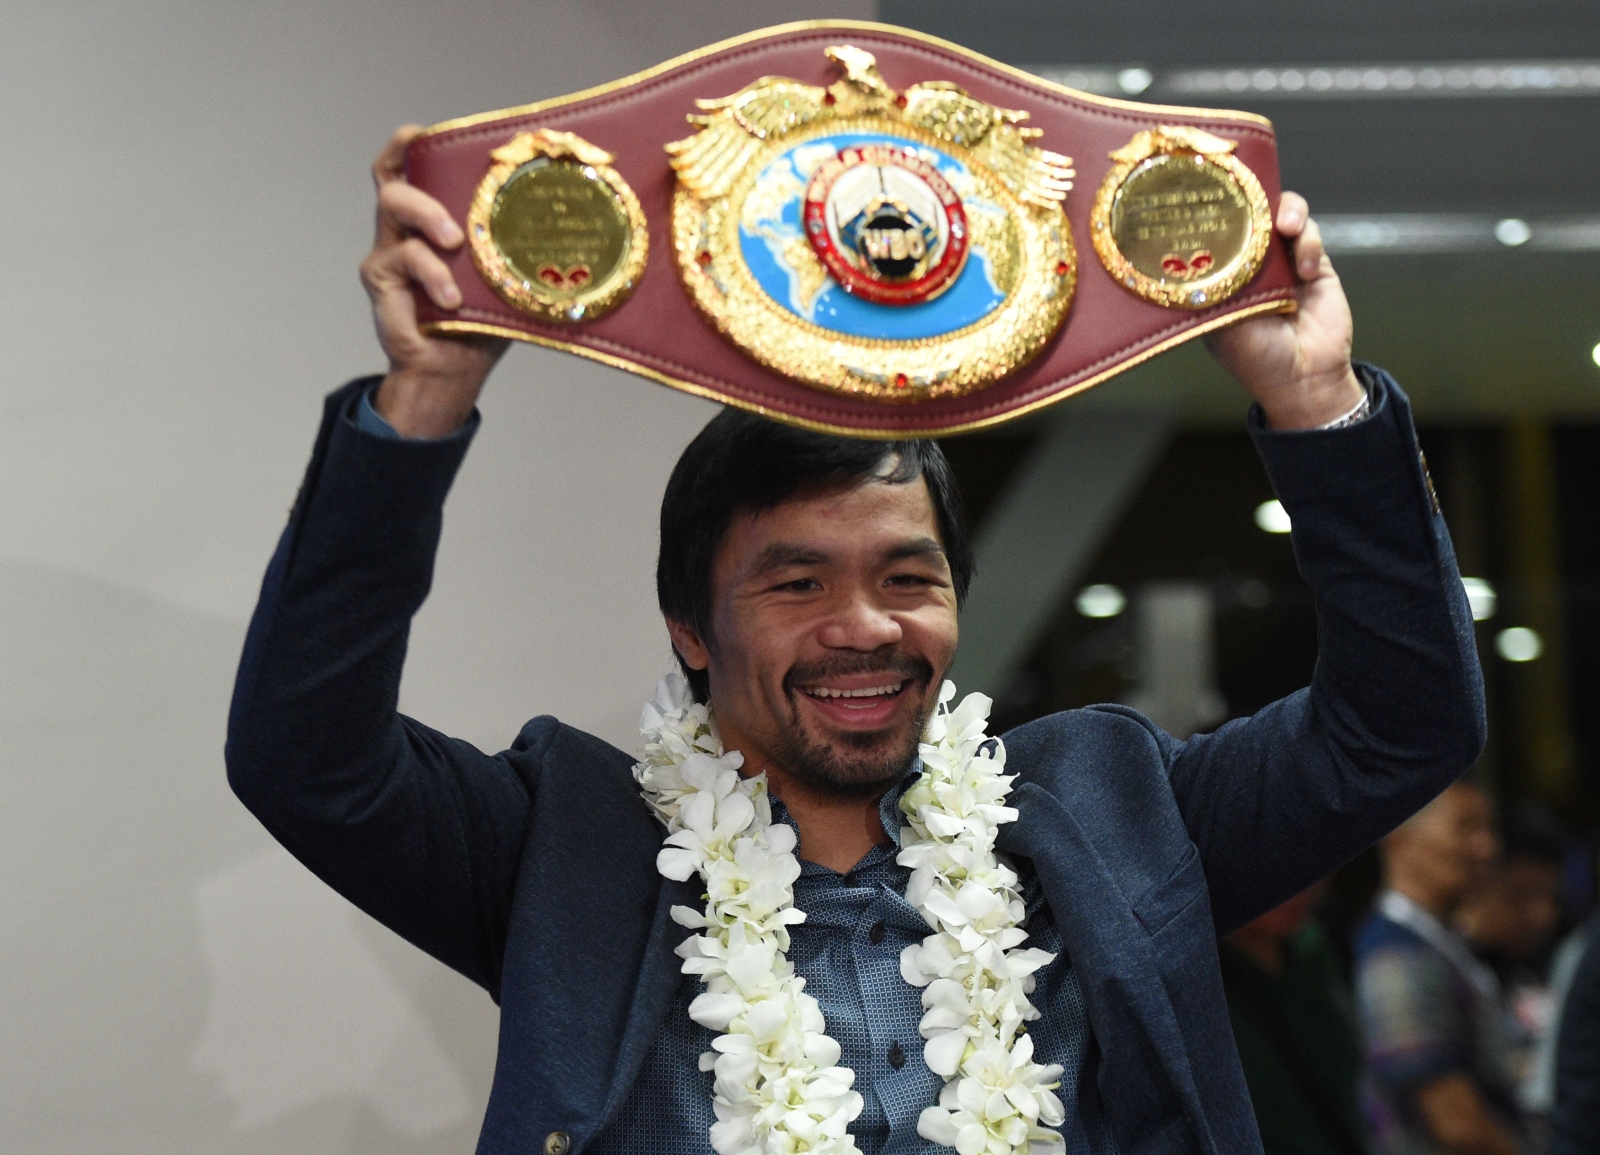 Manny Pacquiao follows in Floyd Mayweather's footsteps with Twitter vote to decide next opponent - International Business Times UK